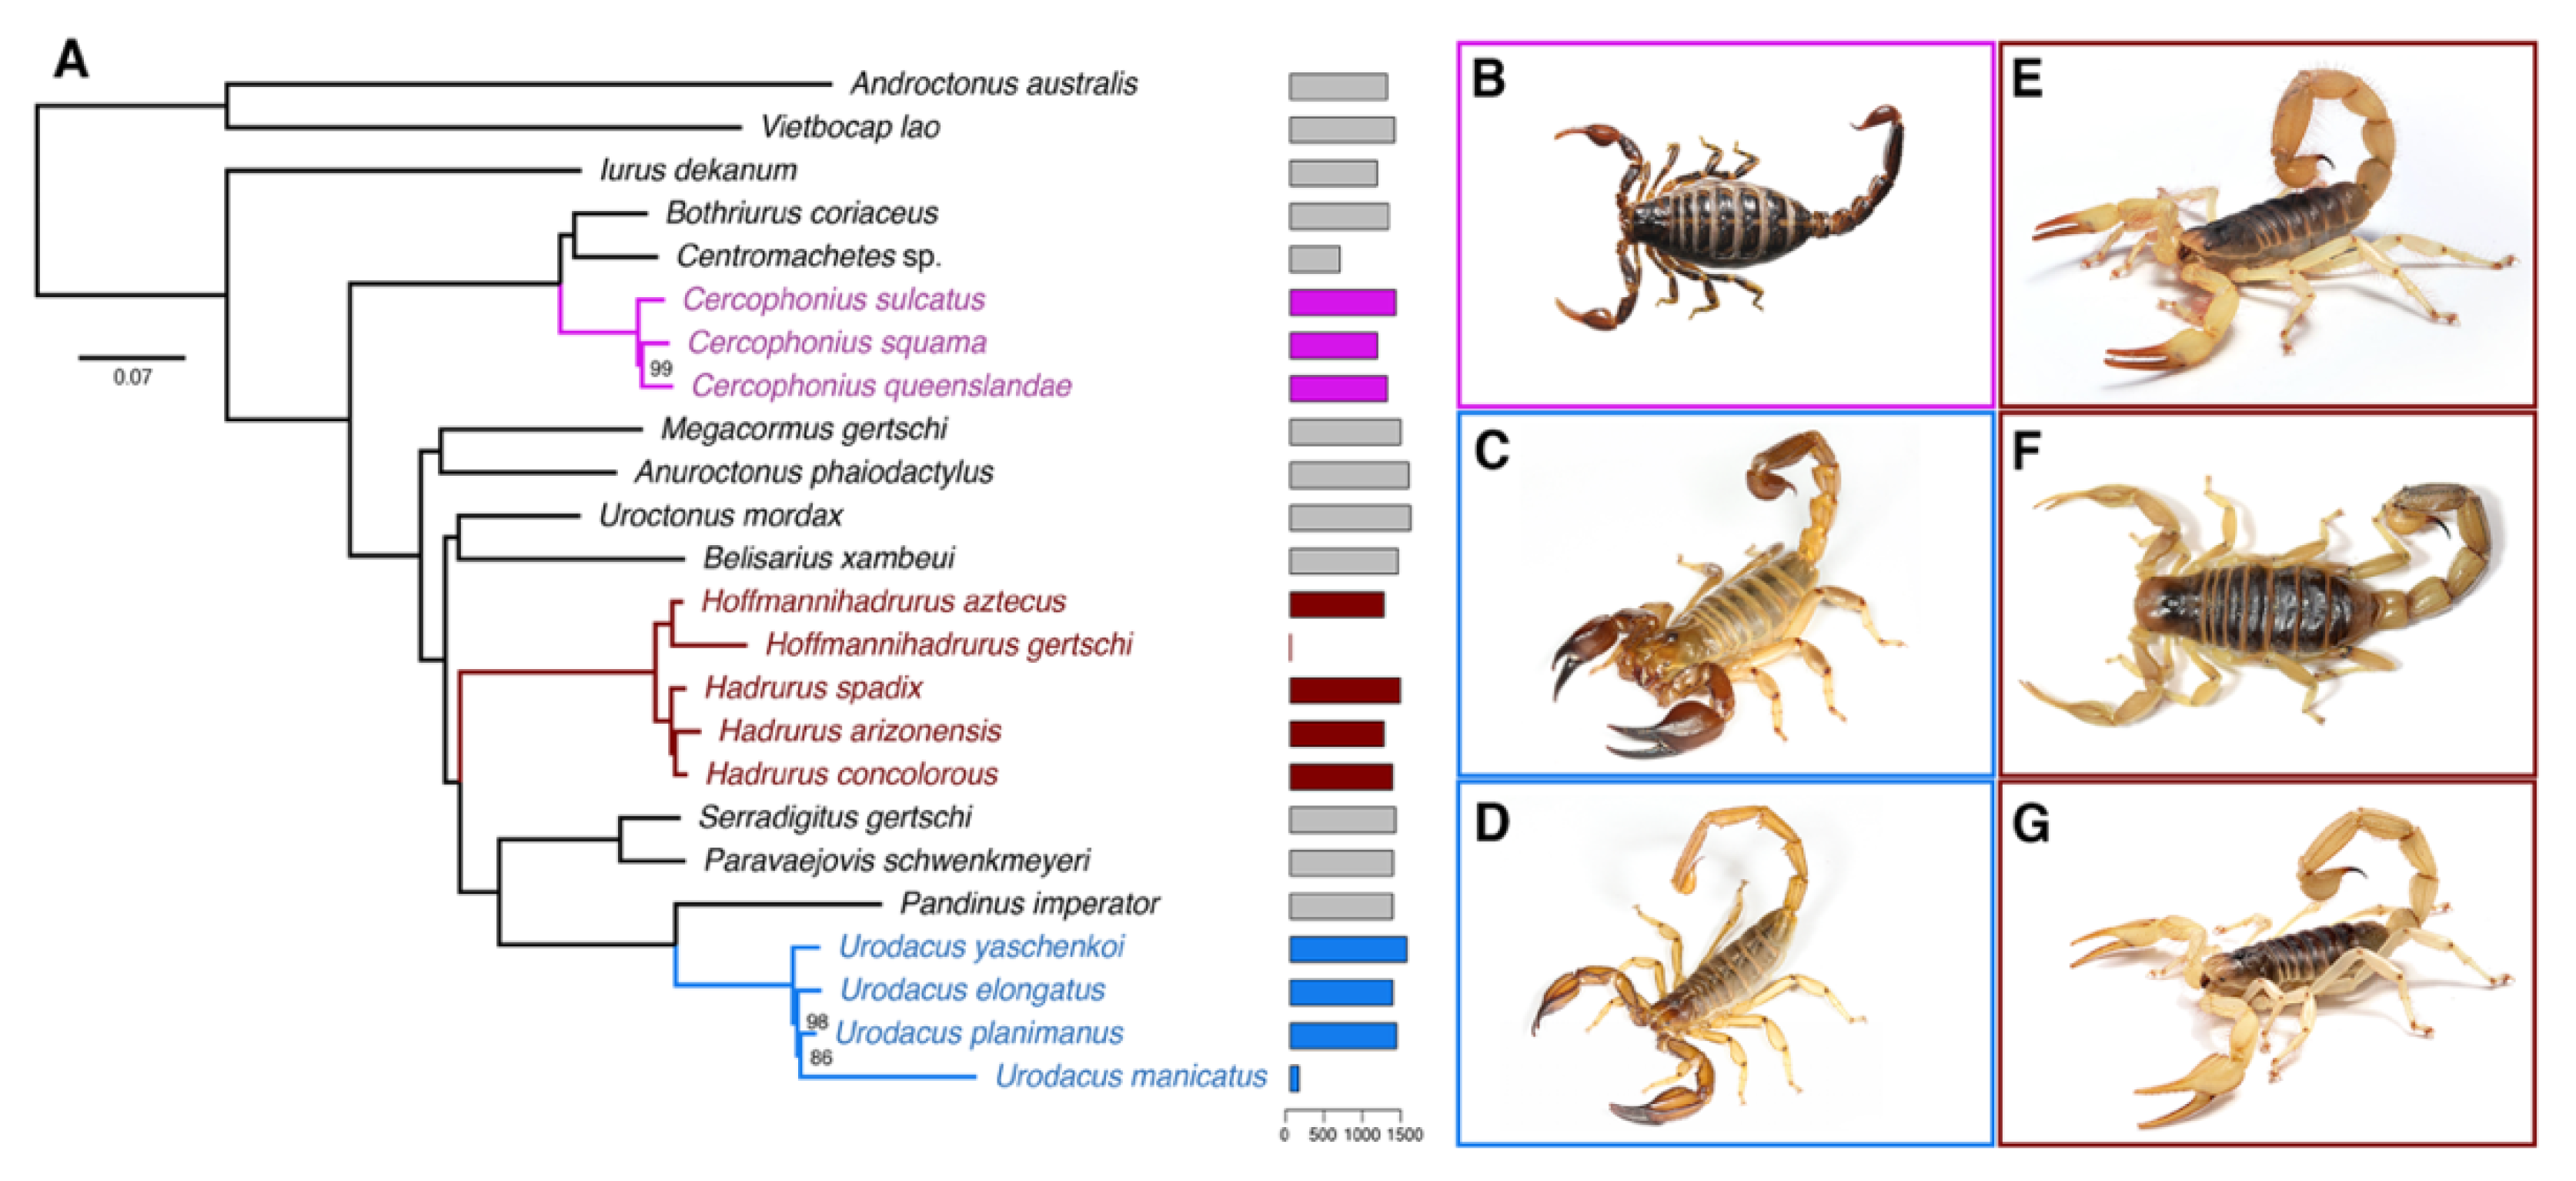 Toxins | Free Full-Text | Hadrurid Scorpion Toxins: Evolutionary  Conservation and Selective Pressures